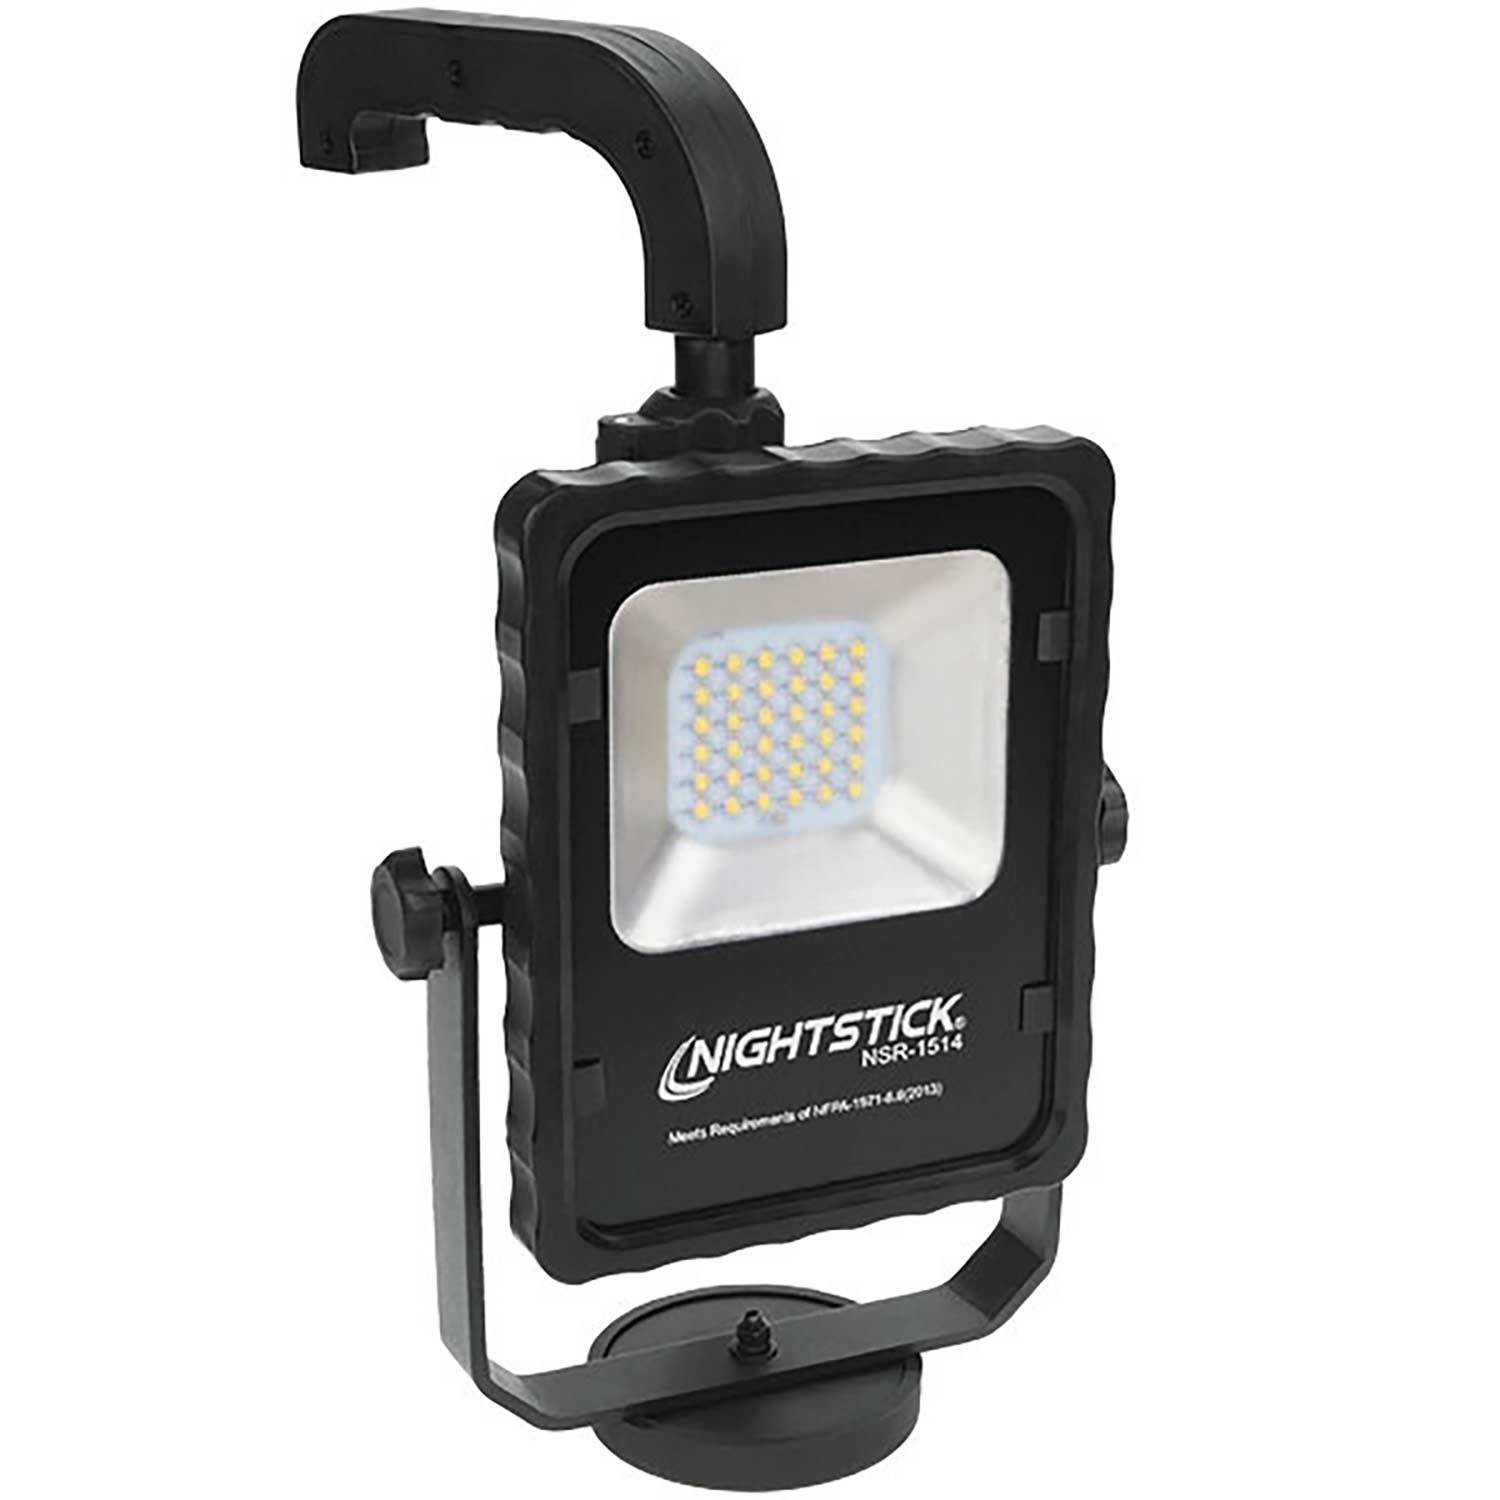 Nightstick NSR-1514 Rechargeable LED Area Light